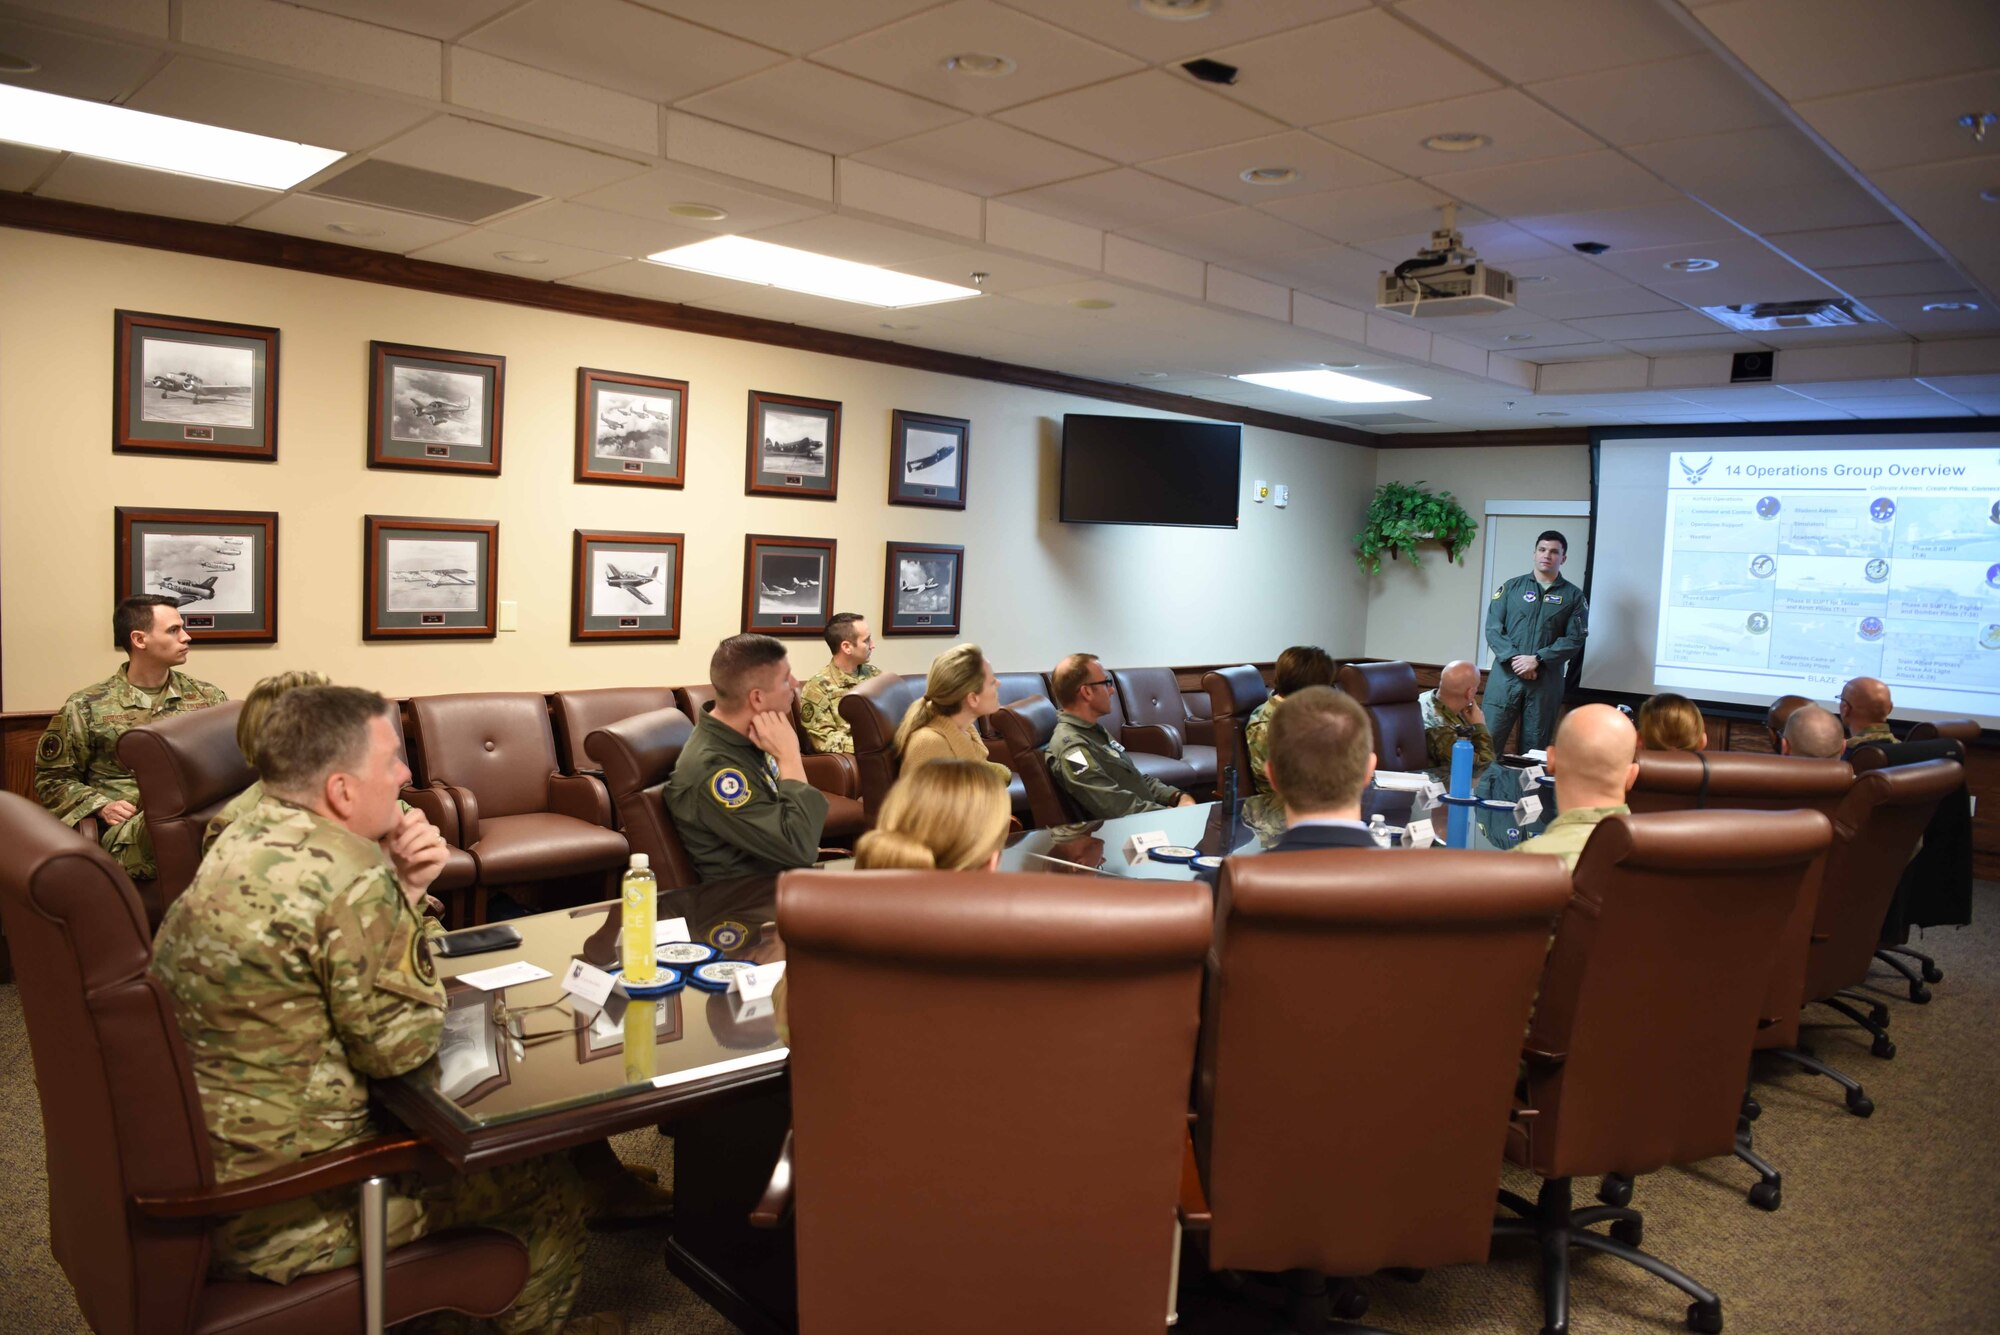 U.S. Air Force Lt. Gen. Brad Webb, commander of Air Education and Training Command receives a mission brief about the base, aircraft flown and its priorities Feb. 5, 2020, on Columbus Air Force Base, Mississippi. Columbus AFB is home to the 14th Flying Training Wing and trains student pilots in the T-6 Texan II, T-38 Talon, and T-1 Jayhawk as they go through Specialized Undergraduate Pilot Training. (U.S. Air Force photo by Airman 1st Class Jake Jacobsen)